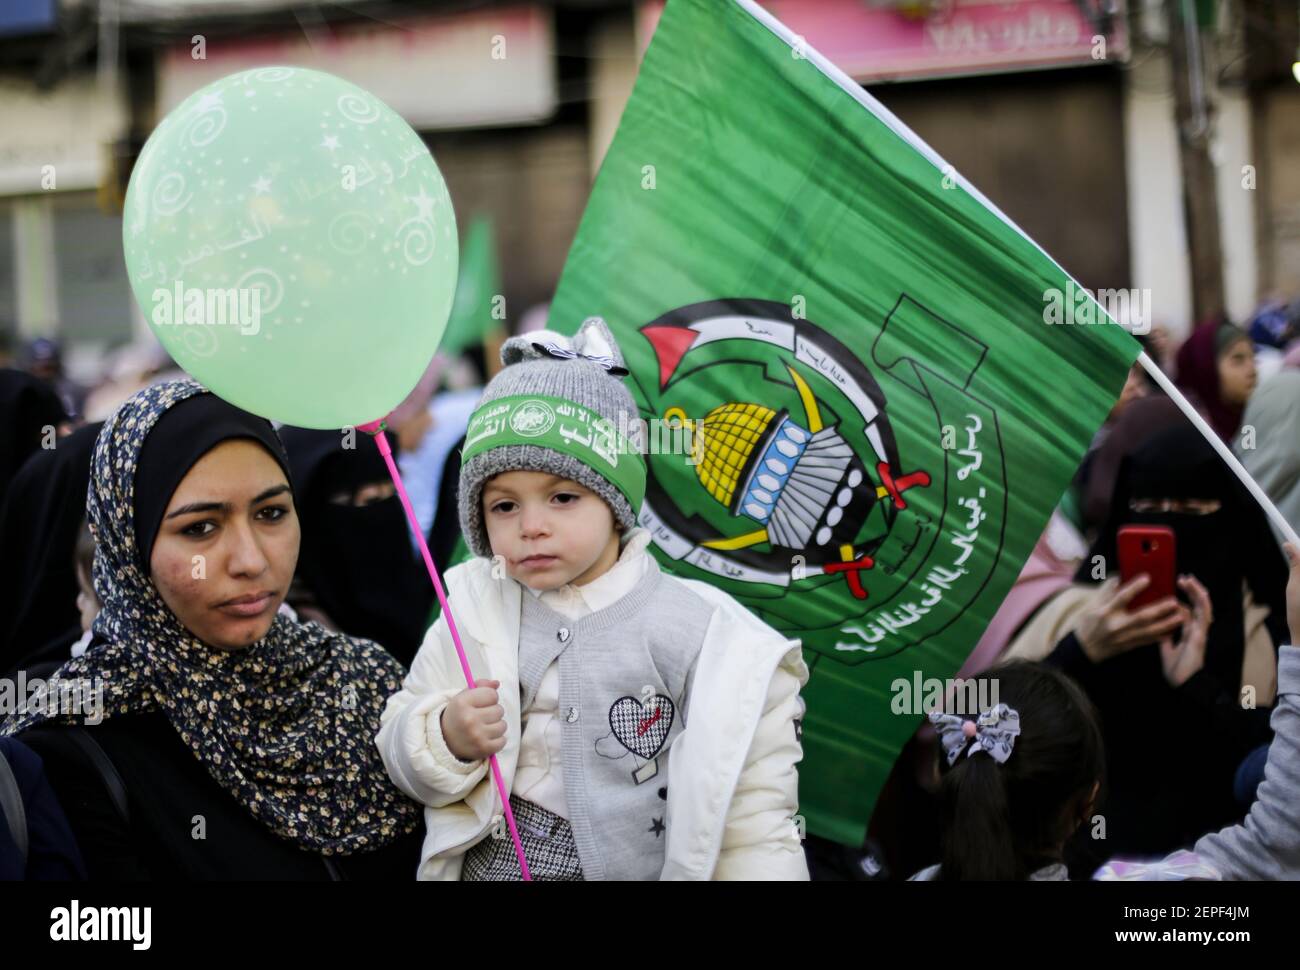 A kid with a Hamas headband while holding a balloon during a rally marking the 32nd anniversary of the founding of the Islamist movement Hamas. (Photo by Mahmoud Issa / SOPA Images/Sipa USA) Stock Photo